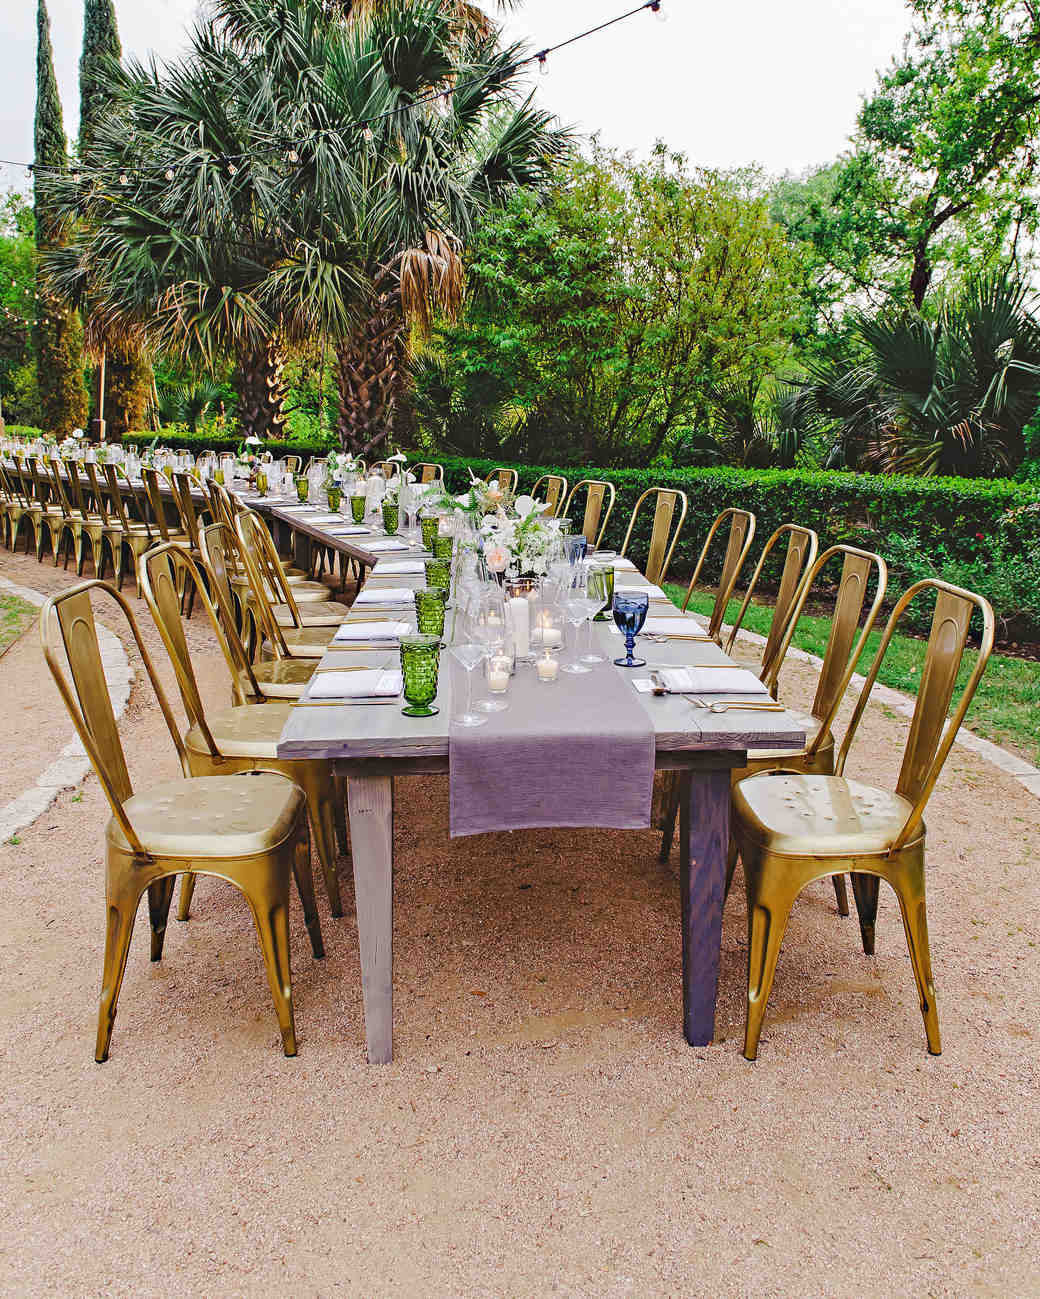 Purple and gold seating plus green and blue mismatched goblets made this curving reception table